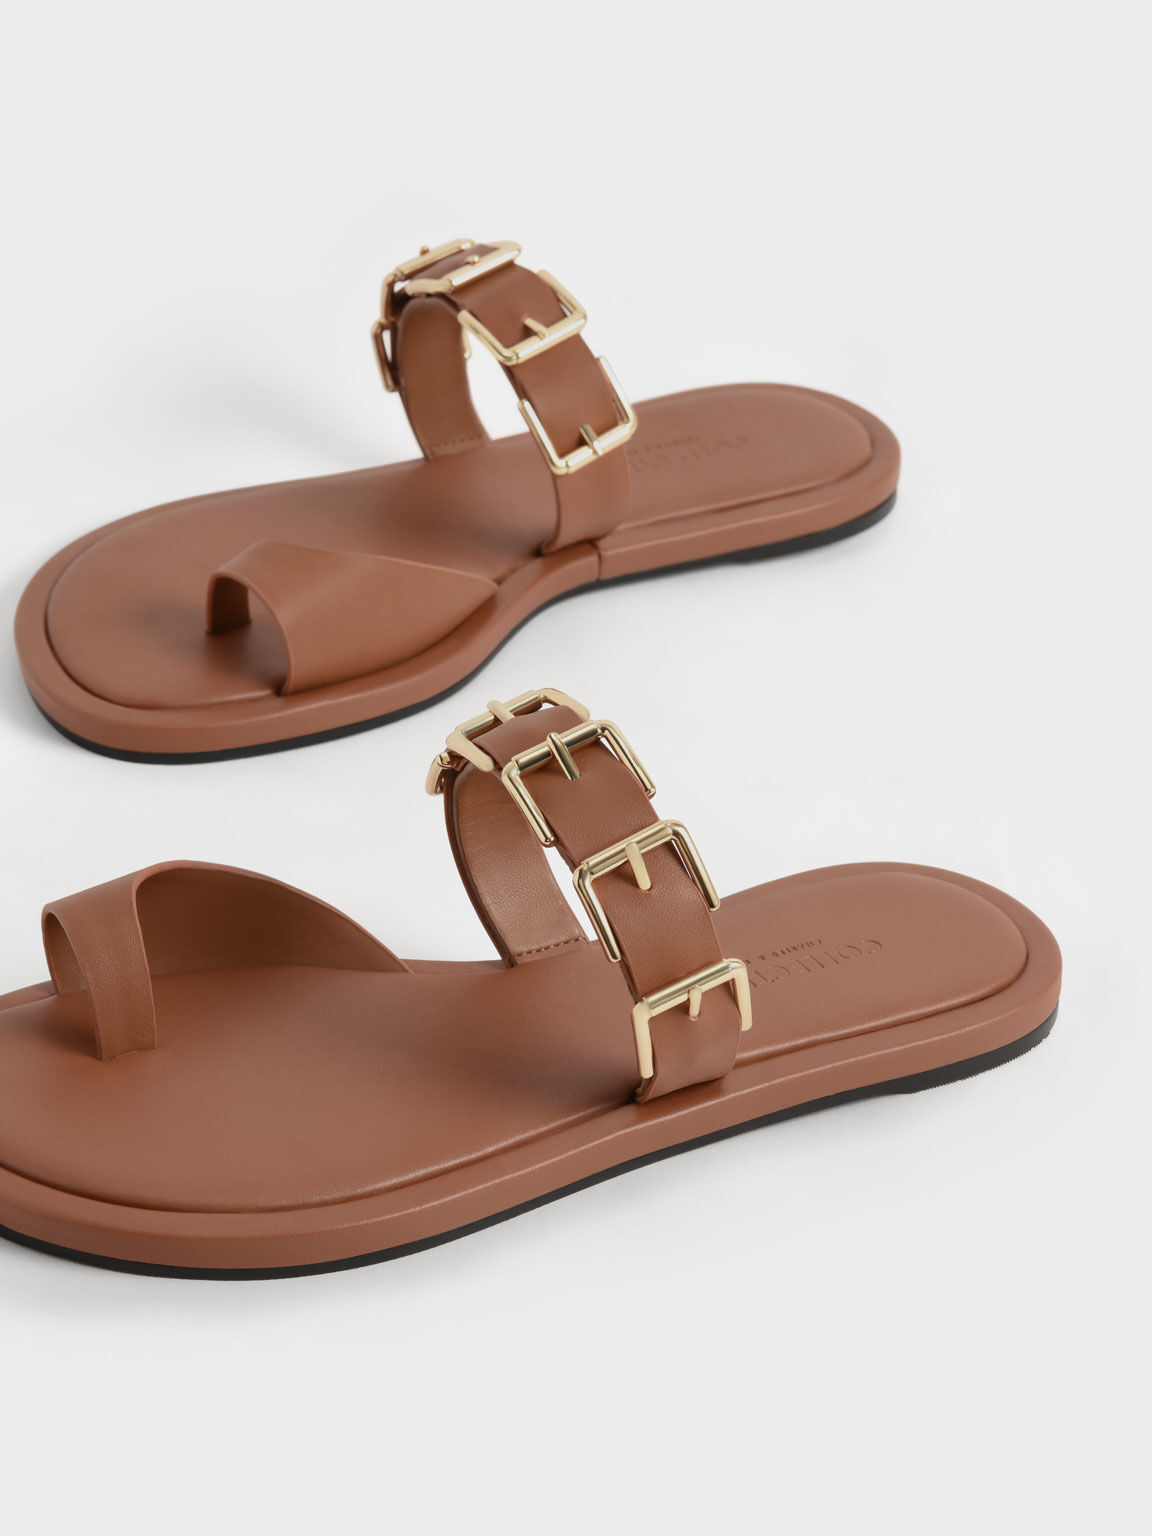 Buckled Leather Toe-Ring Sandals, Brown, hi-res